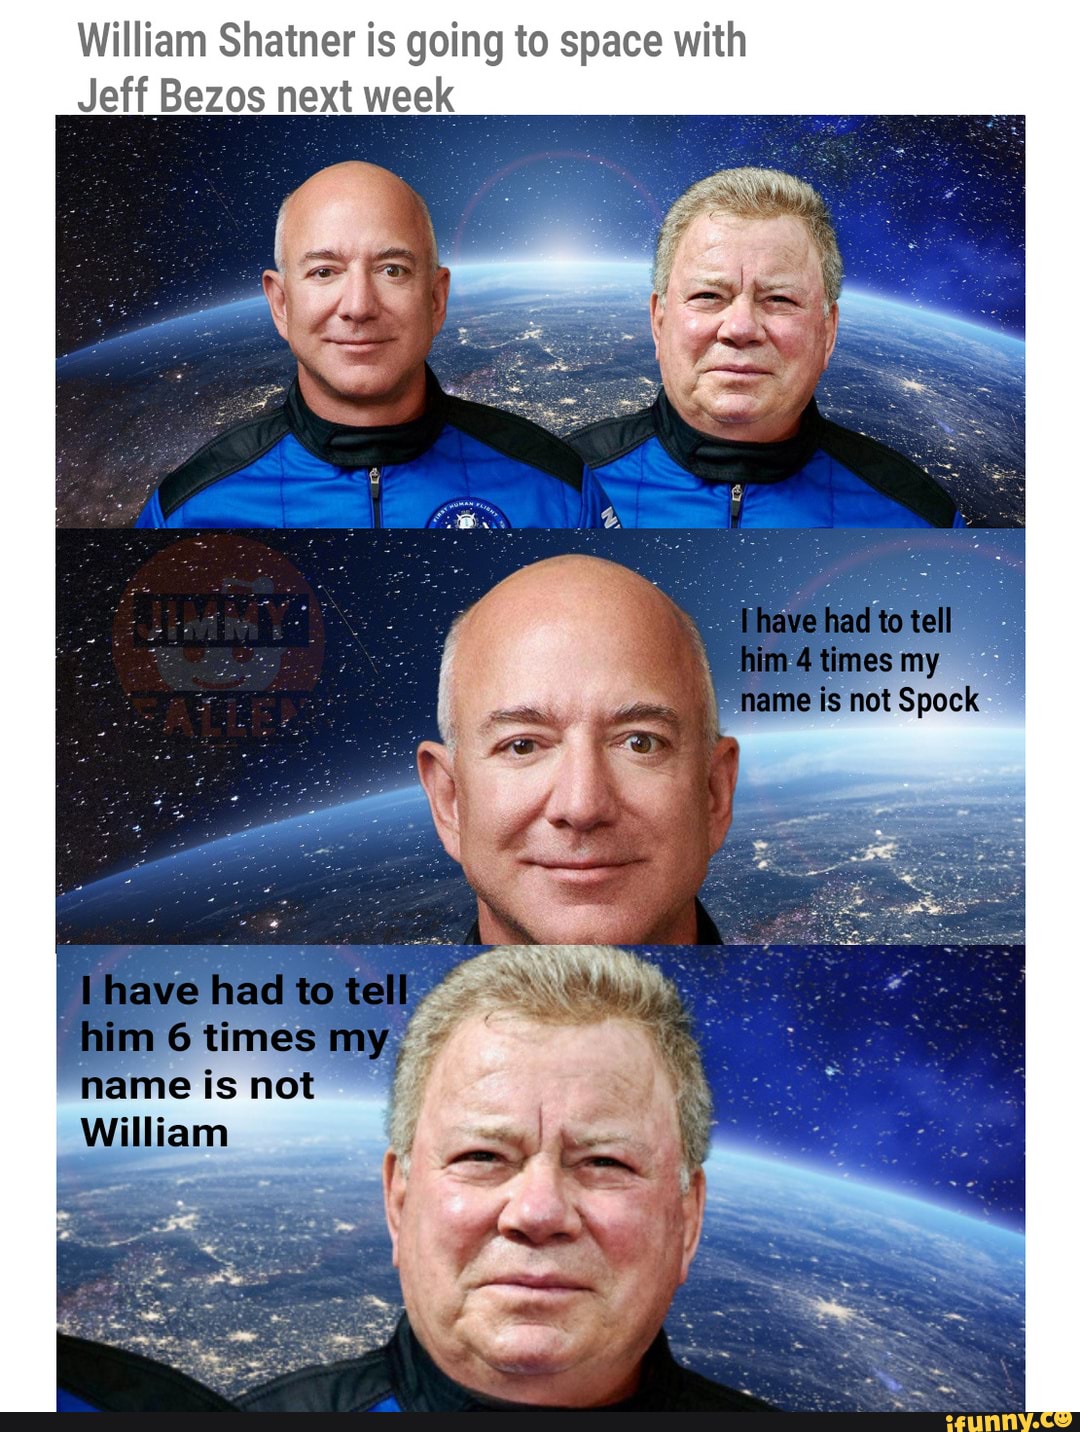 William Shatner is going to space with Jeff Bezos next week have had to  tell me is not Spock him times my name is not William -